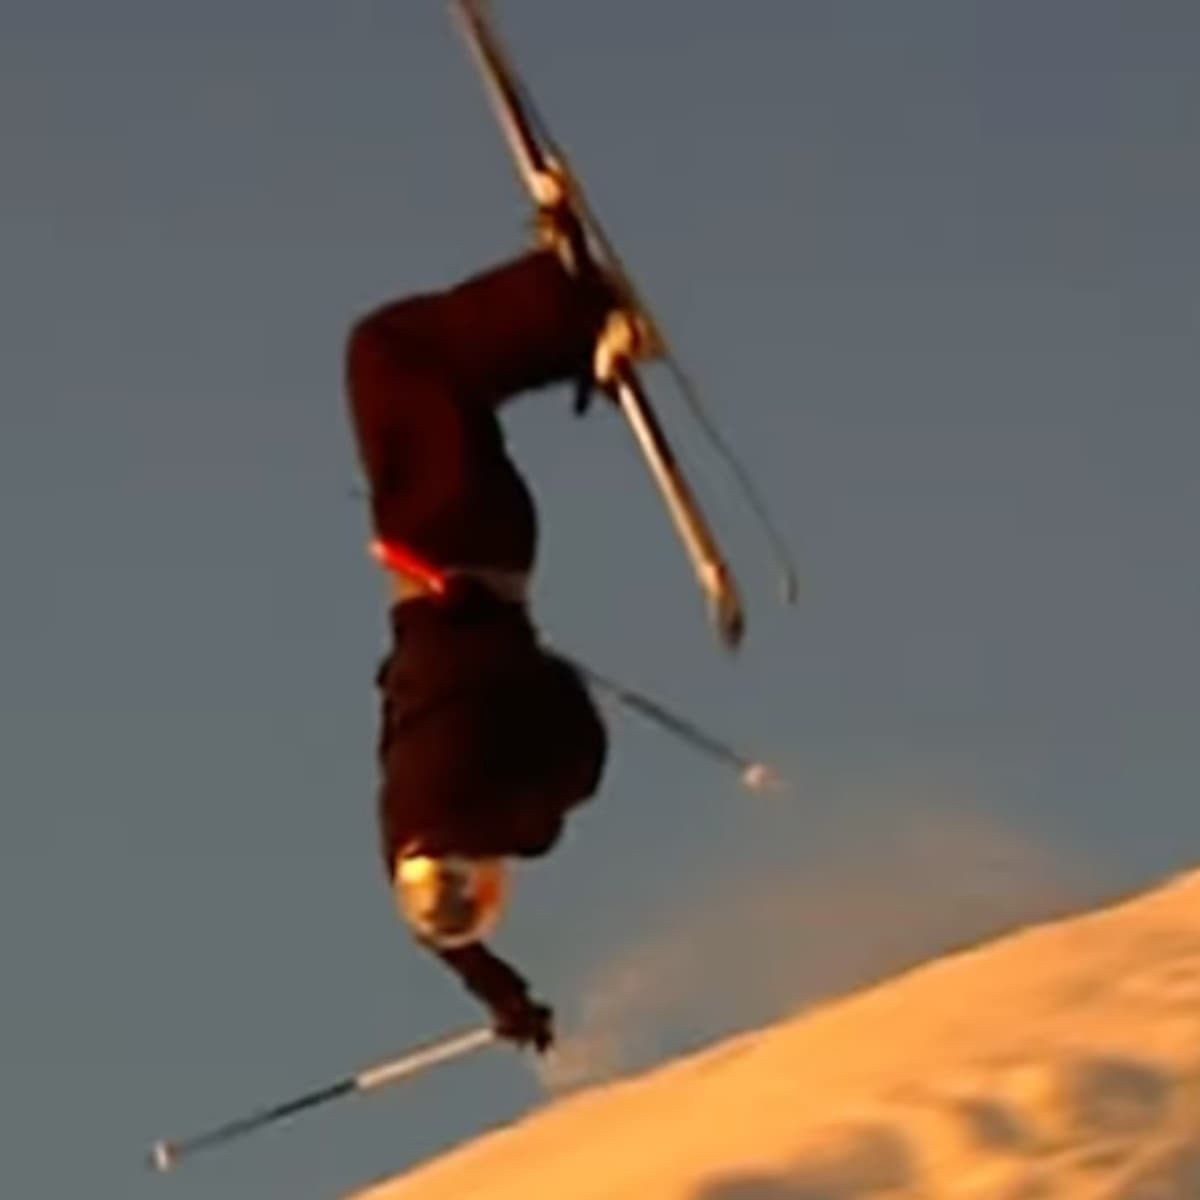 Look Elite Pro Skier Cant Believe His Innovative Trick Actually Worked image